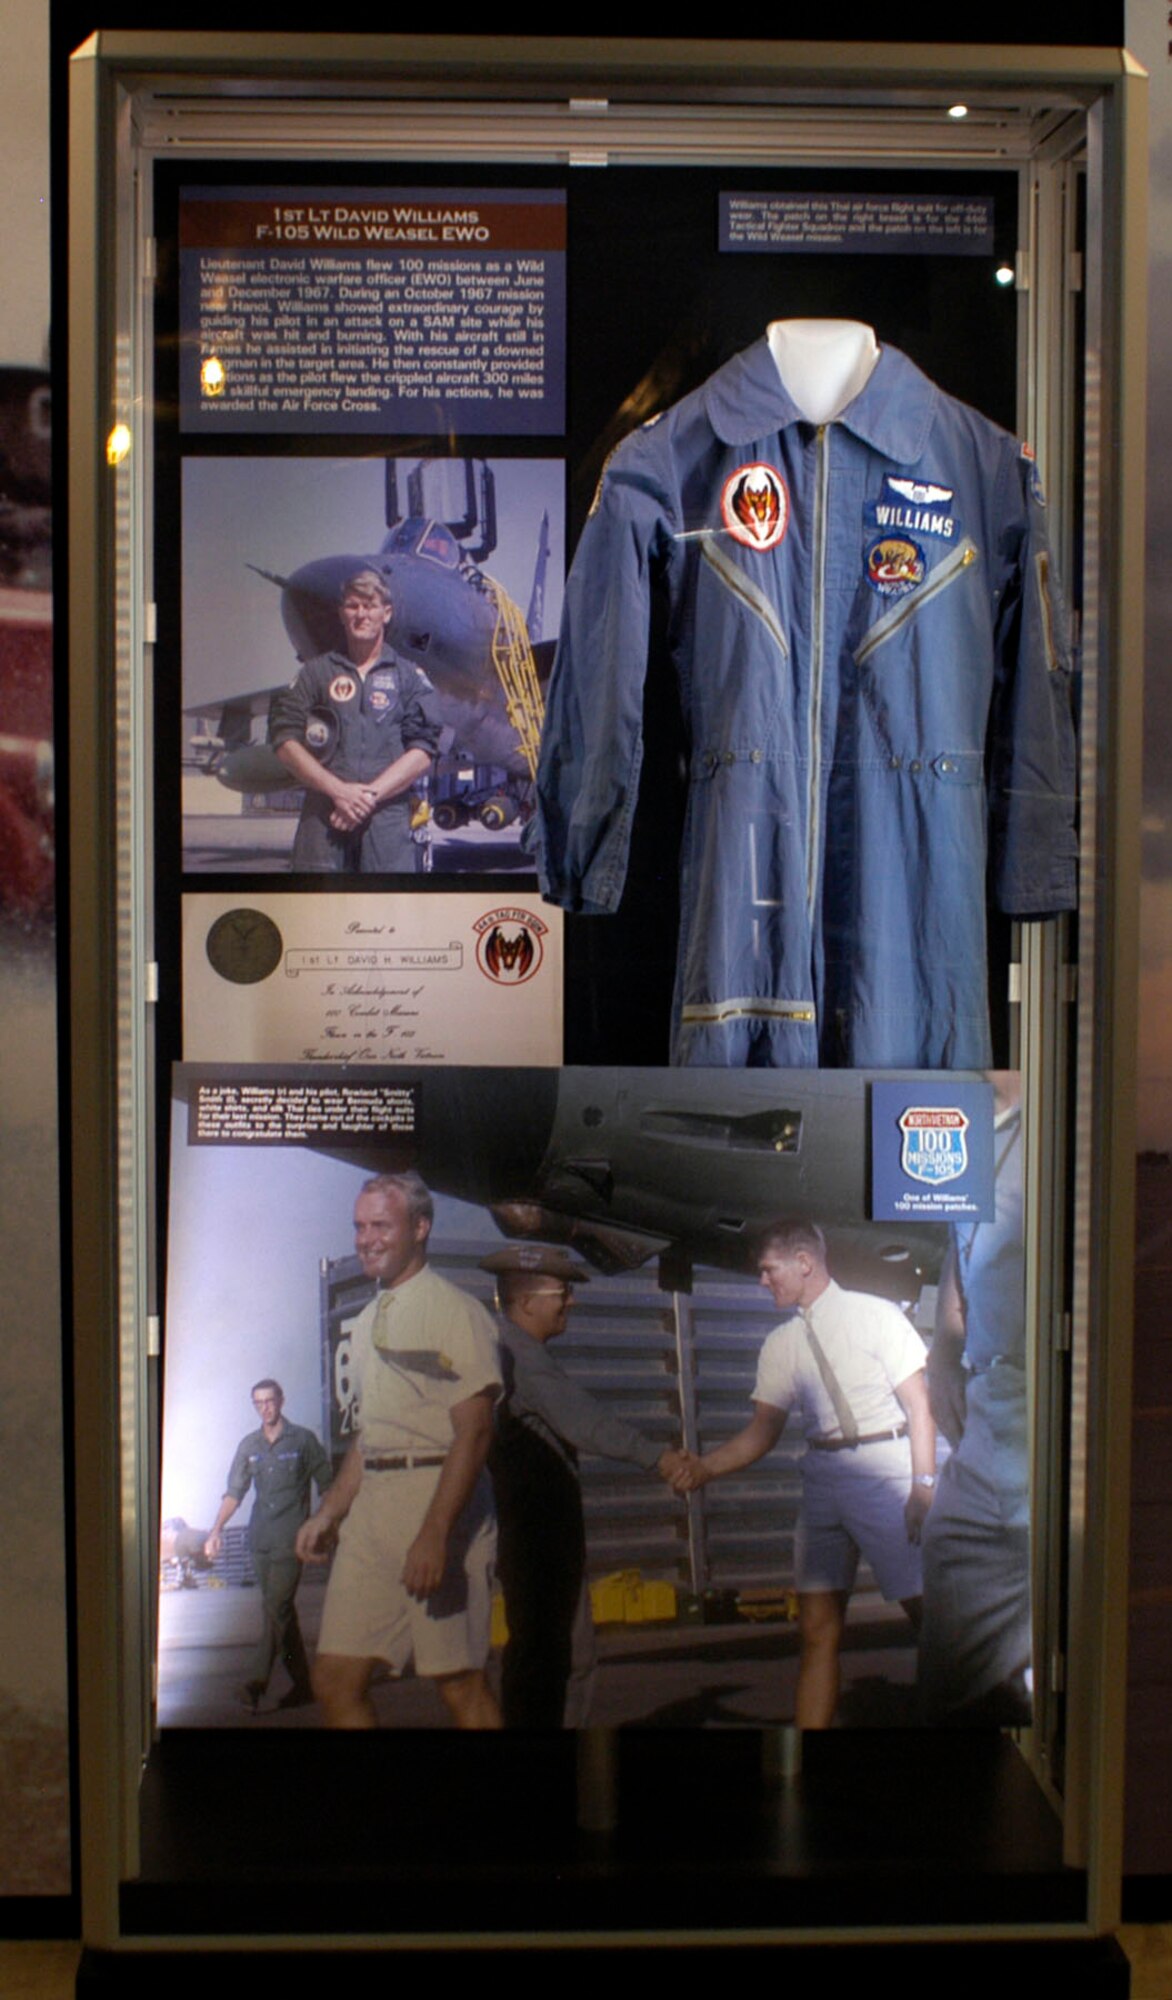 DAYTON, Ohio - 1st Lt. David Williams obtained this Thai air force flight suit for off-duty wear. The patch on the right breast is for the 44th Tactical Fighter Squadron and the patch on the left is for the Wild Weasel mission. Also displayed is one of Williams’ 100 mission patches. (U.S. Air Force photo)